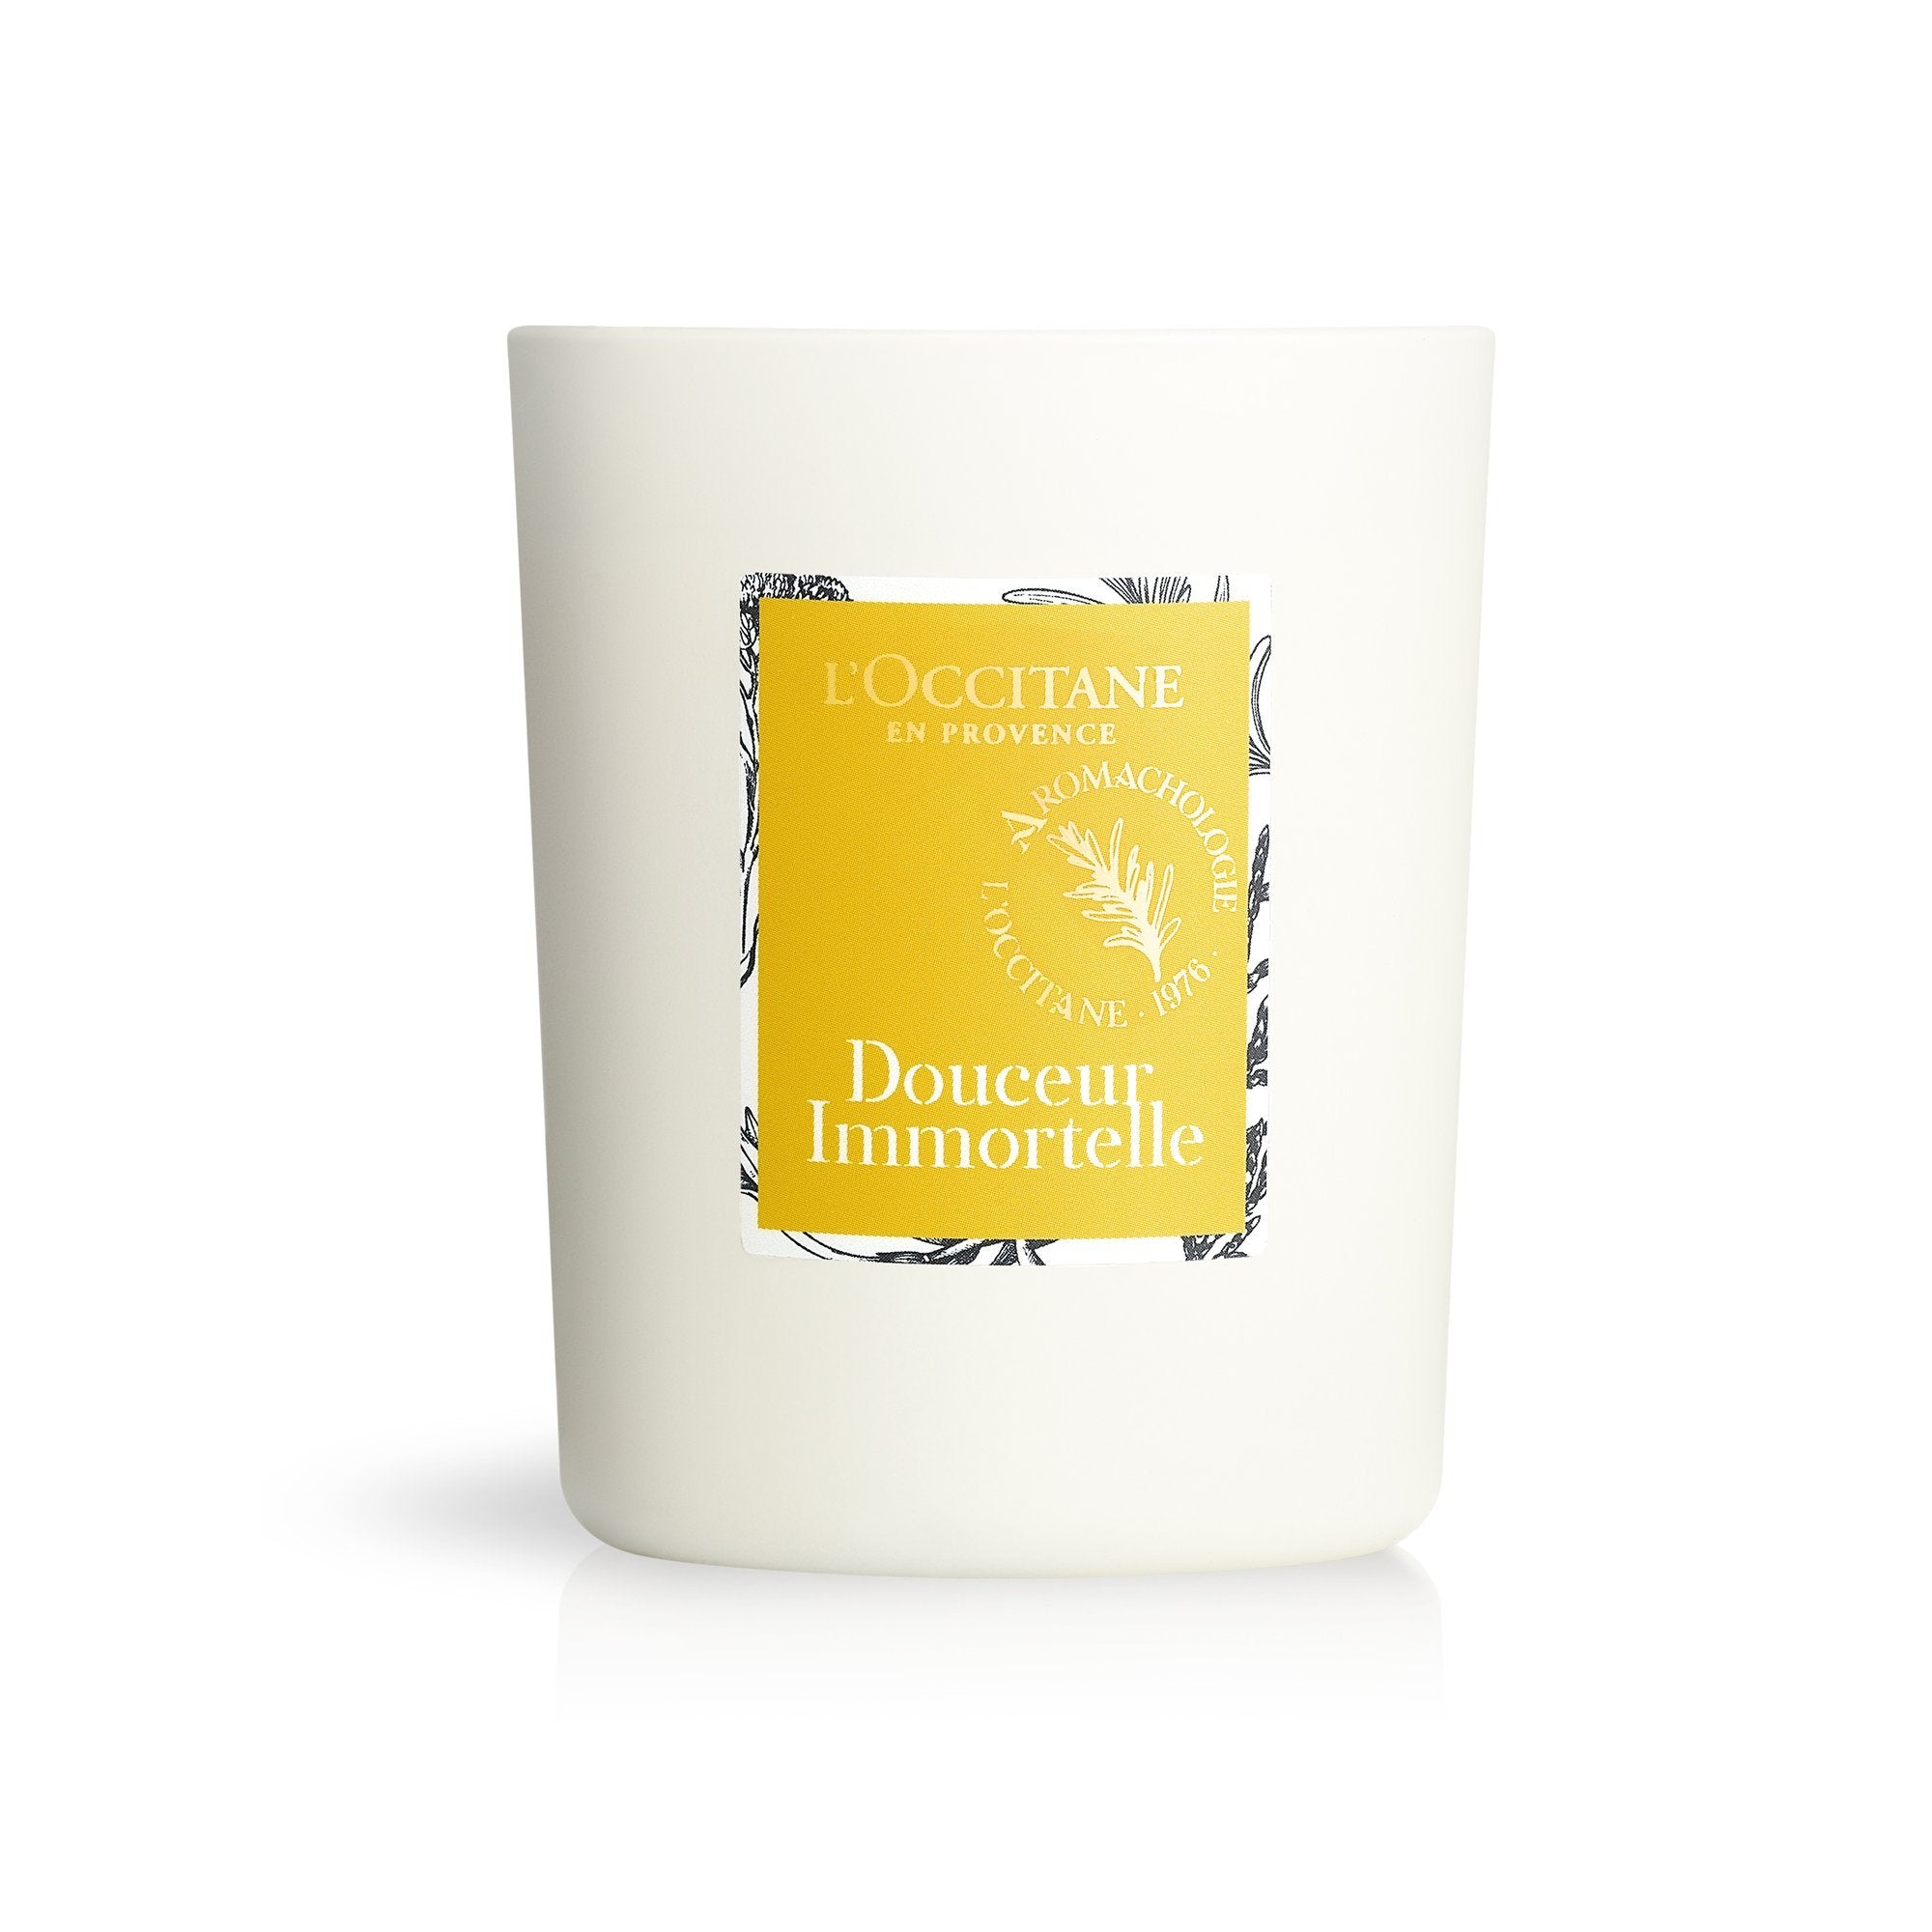 L’Occitane Uplifting Scented Candle - Kate's Kitchen